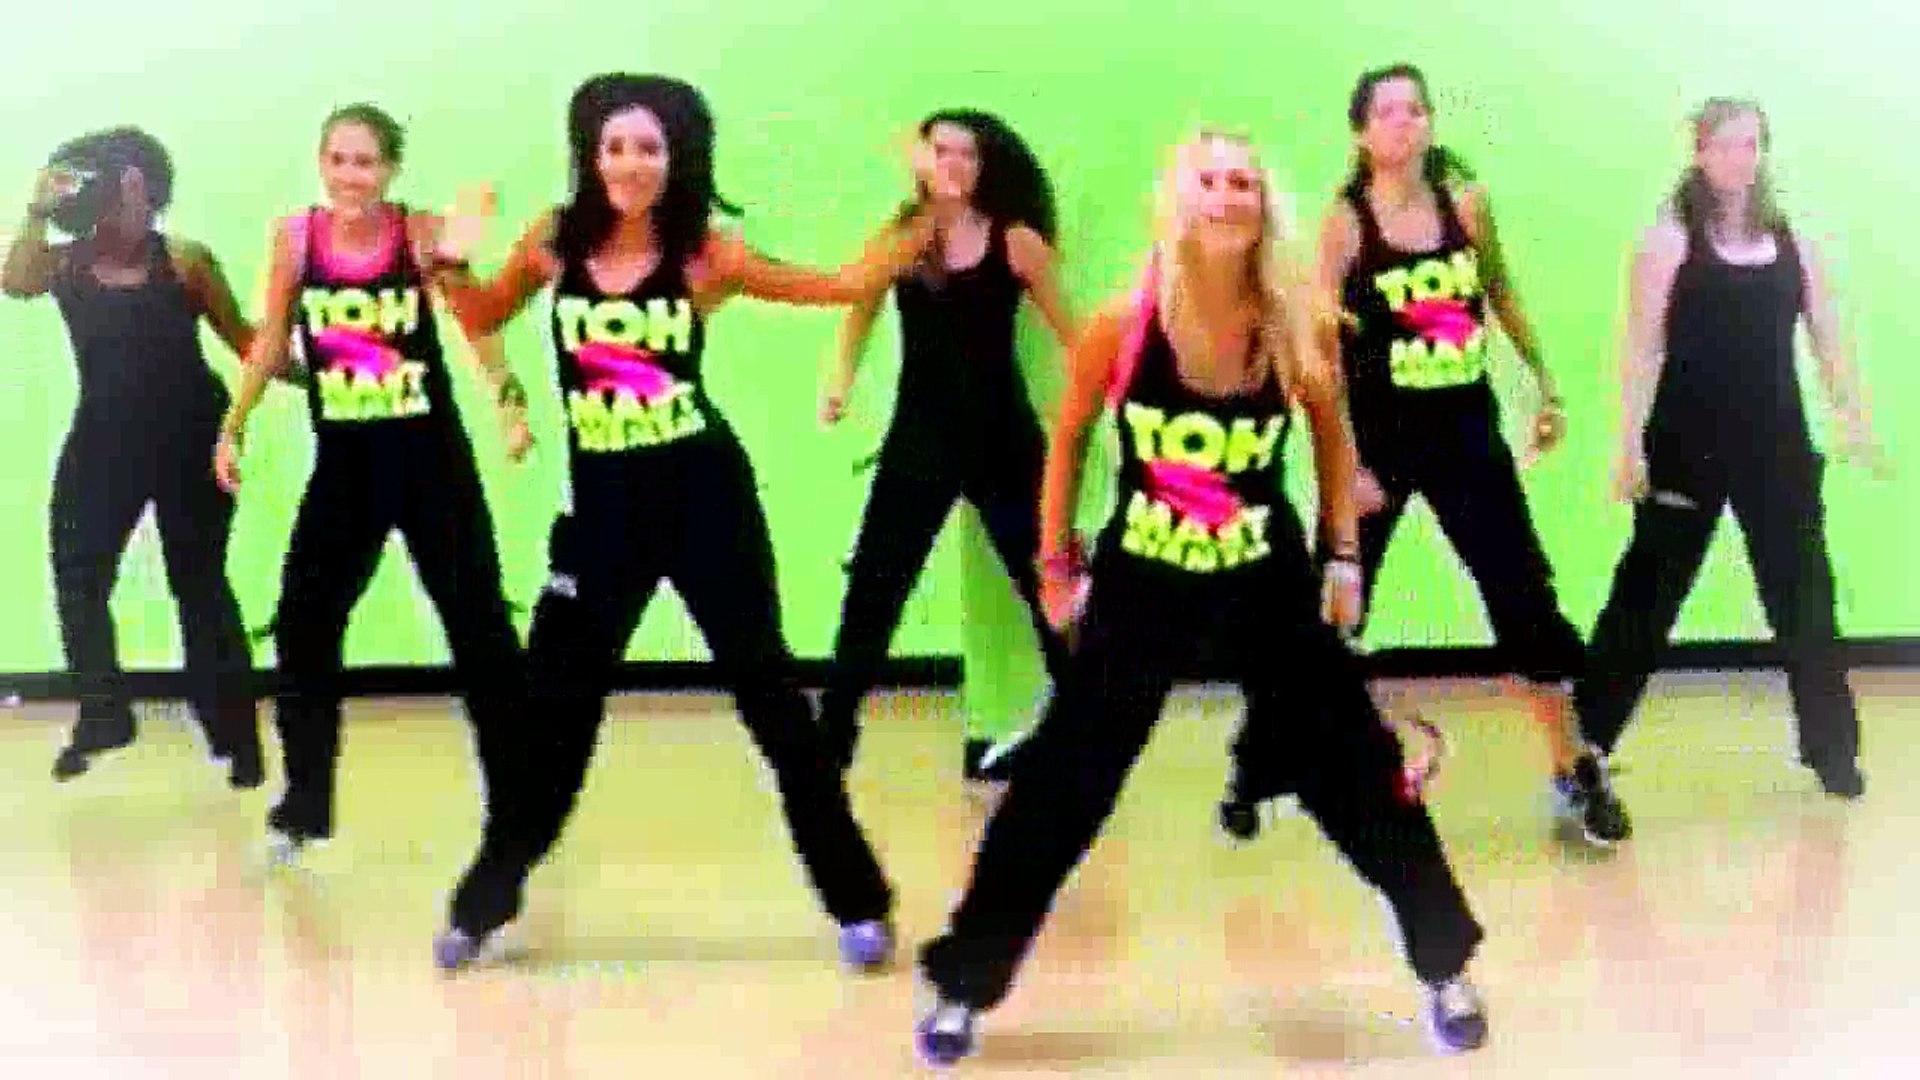 Best zumba dance exercise to lose weight ==[[full video]]==